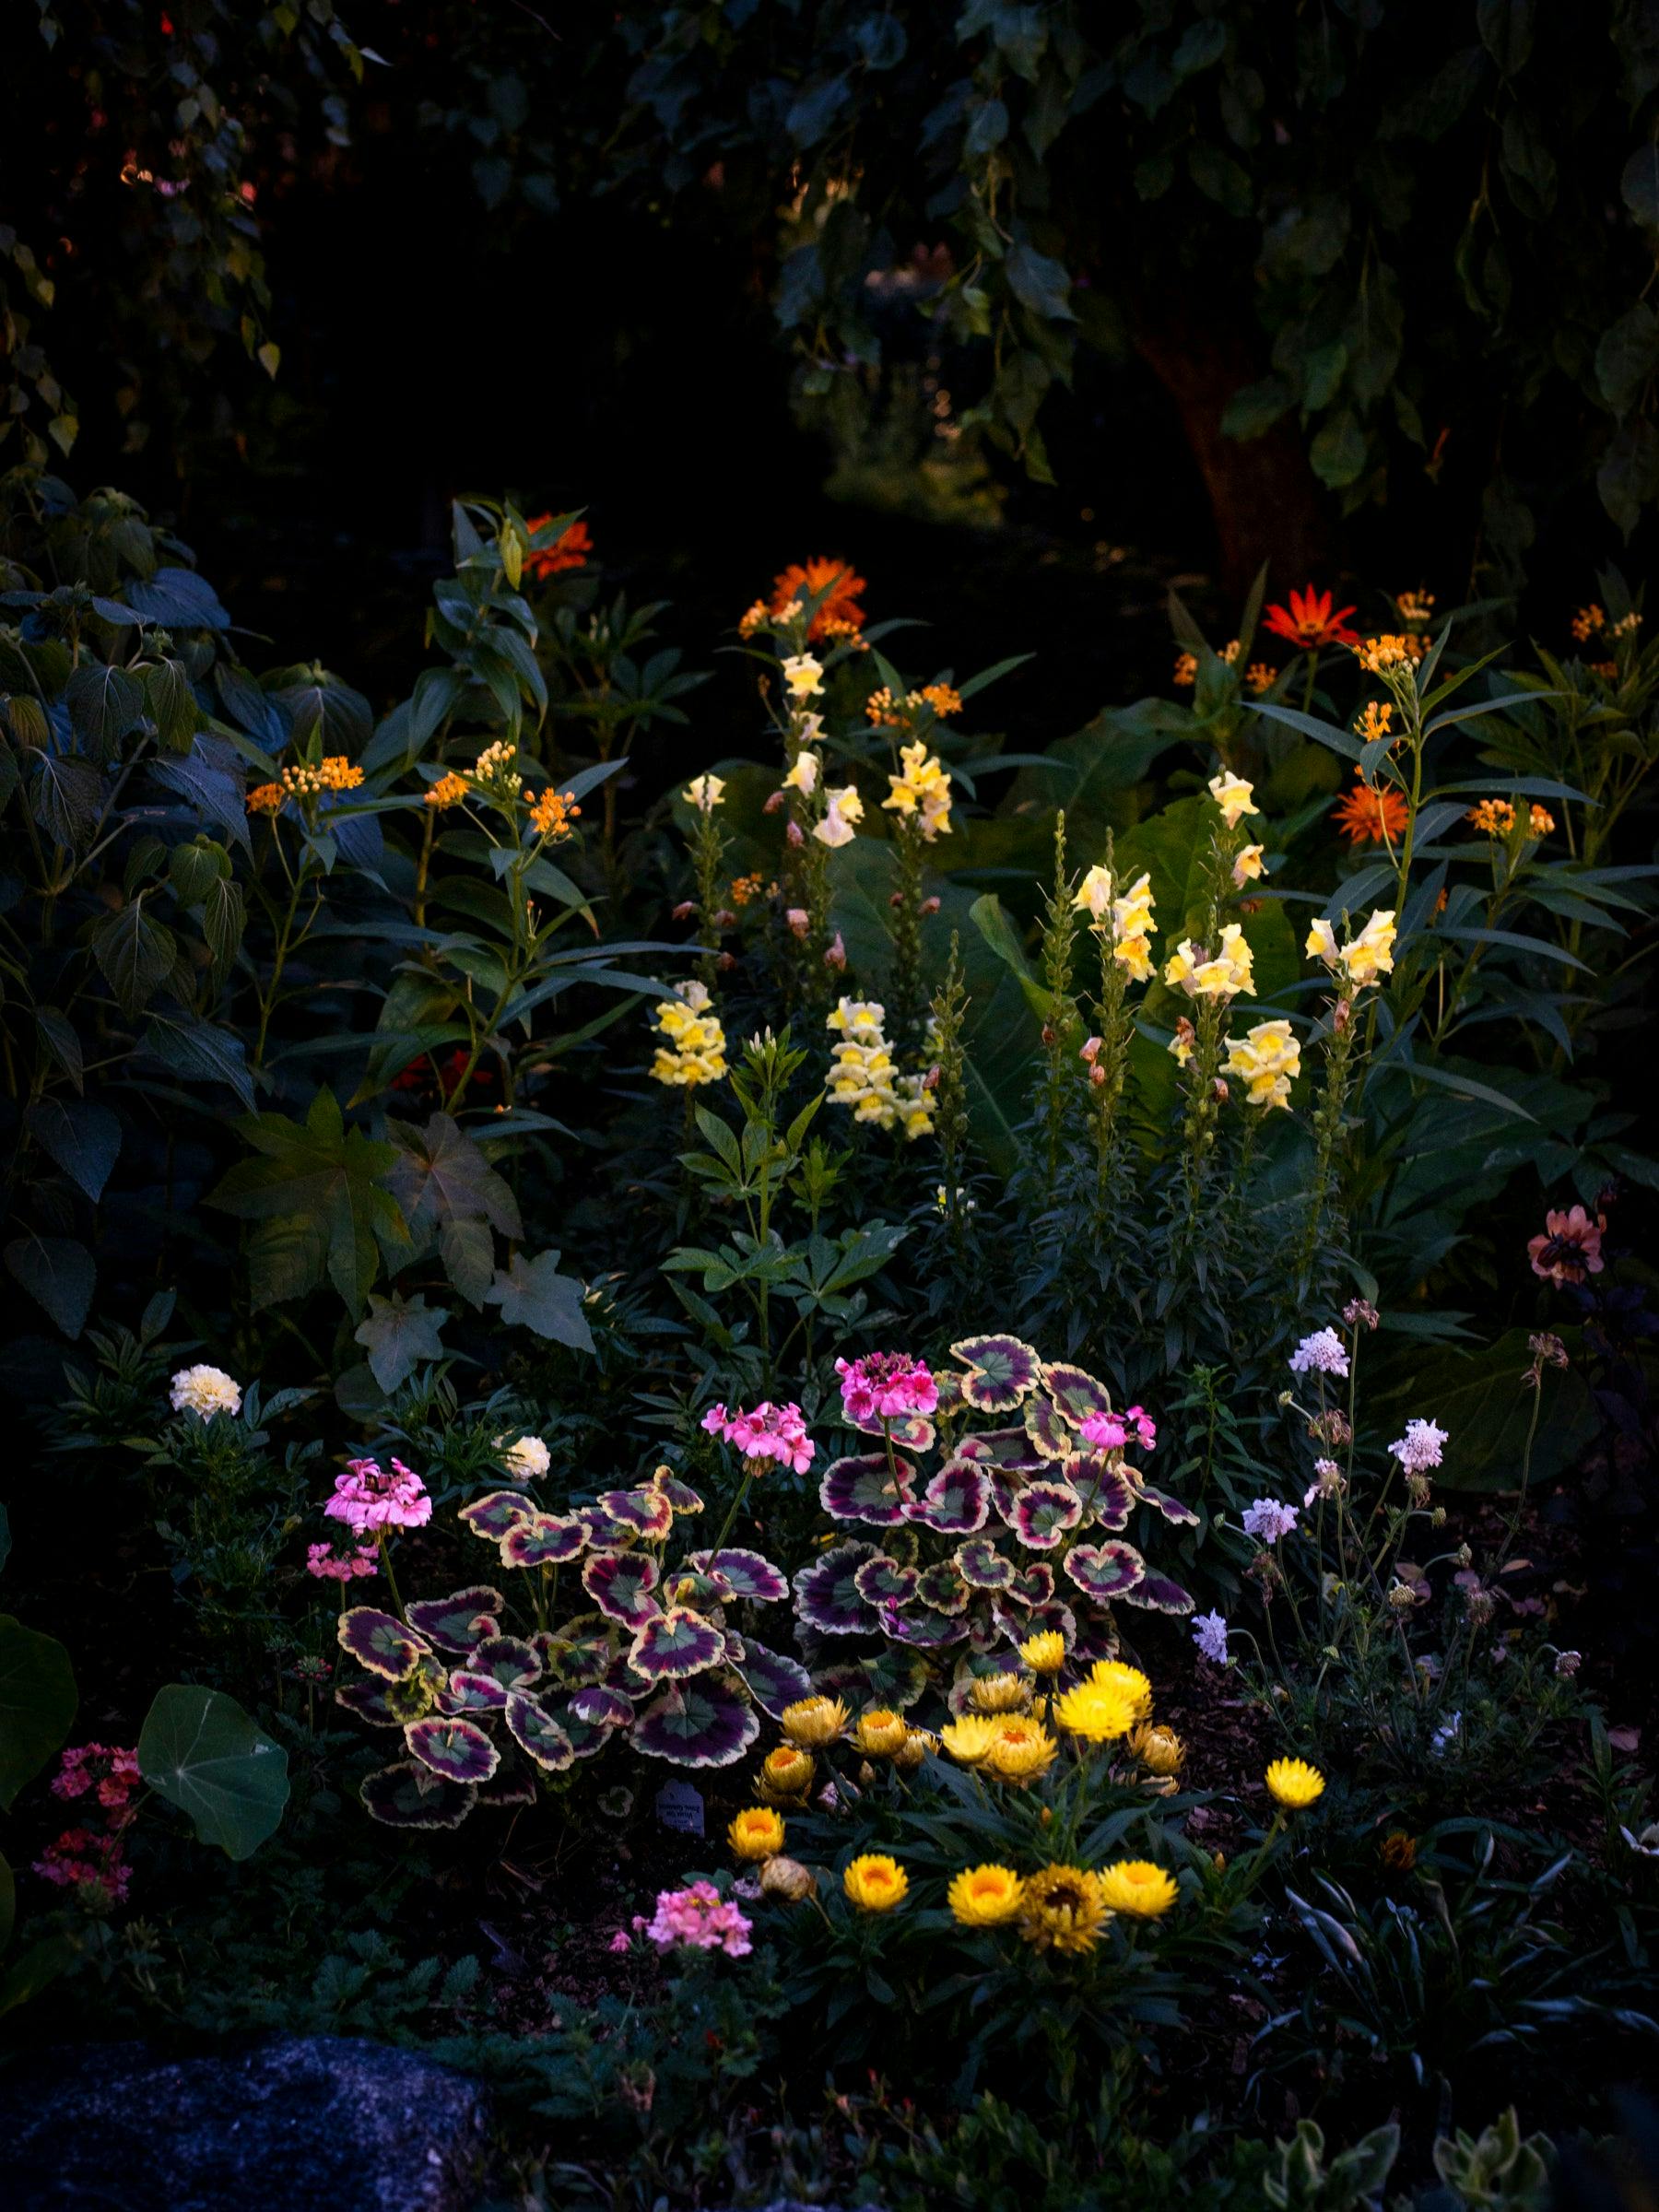 Photography by Anna Beeke titled "Midnight in the Garden #213".